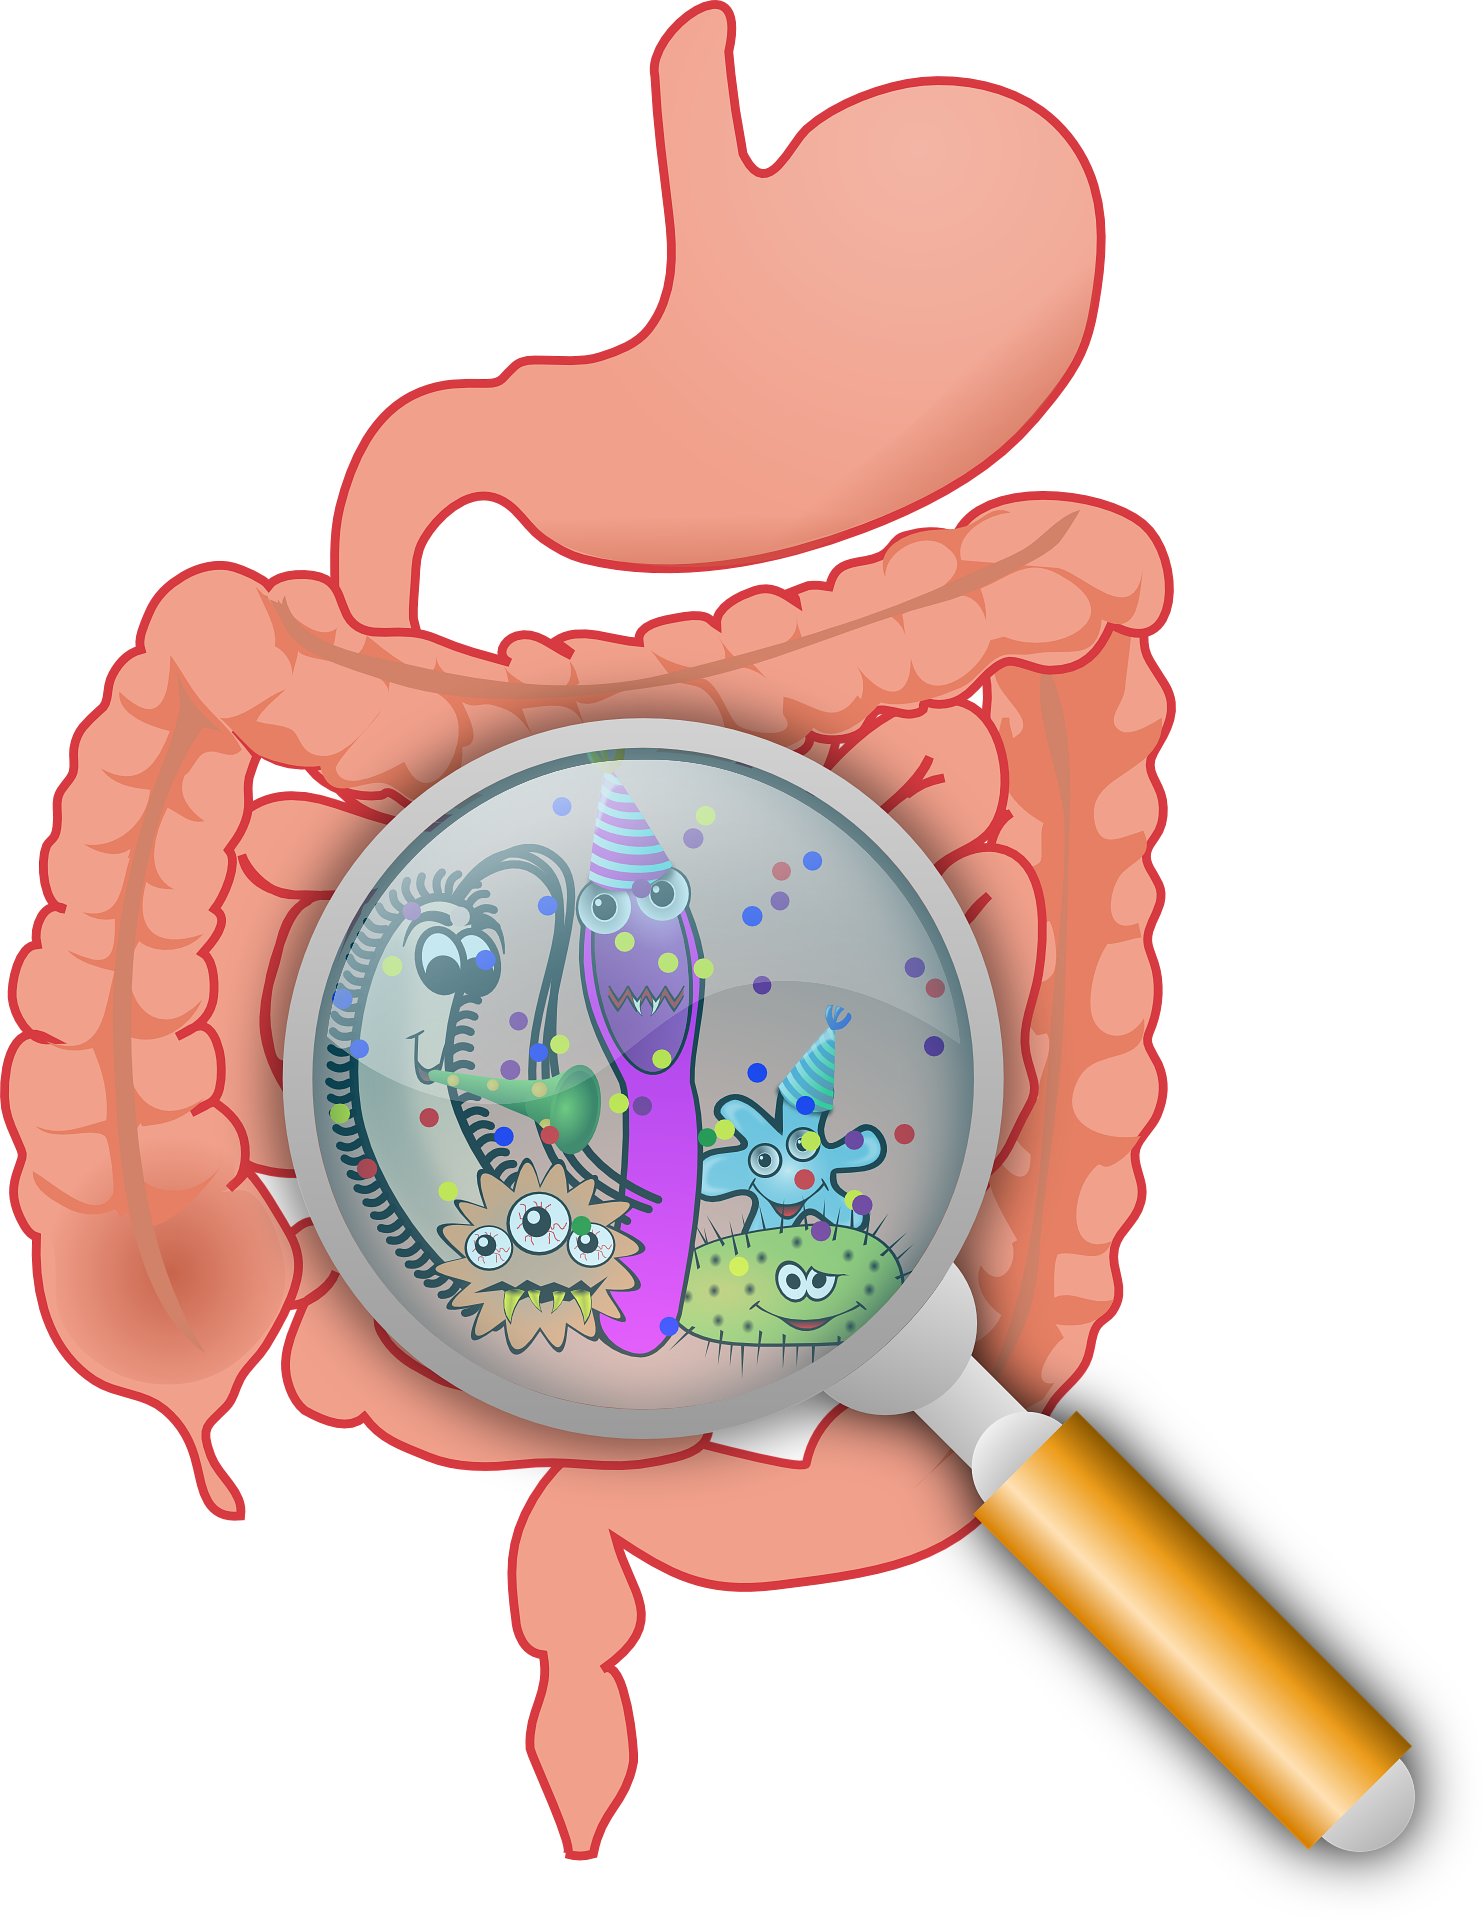 Next frontier in study of gut bacteria: mining microbial molecules